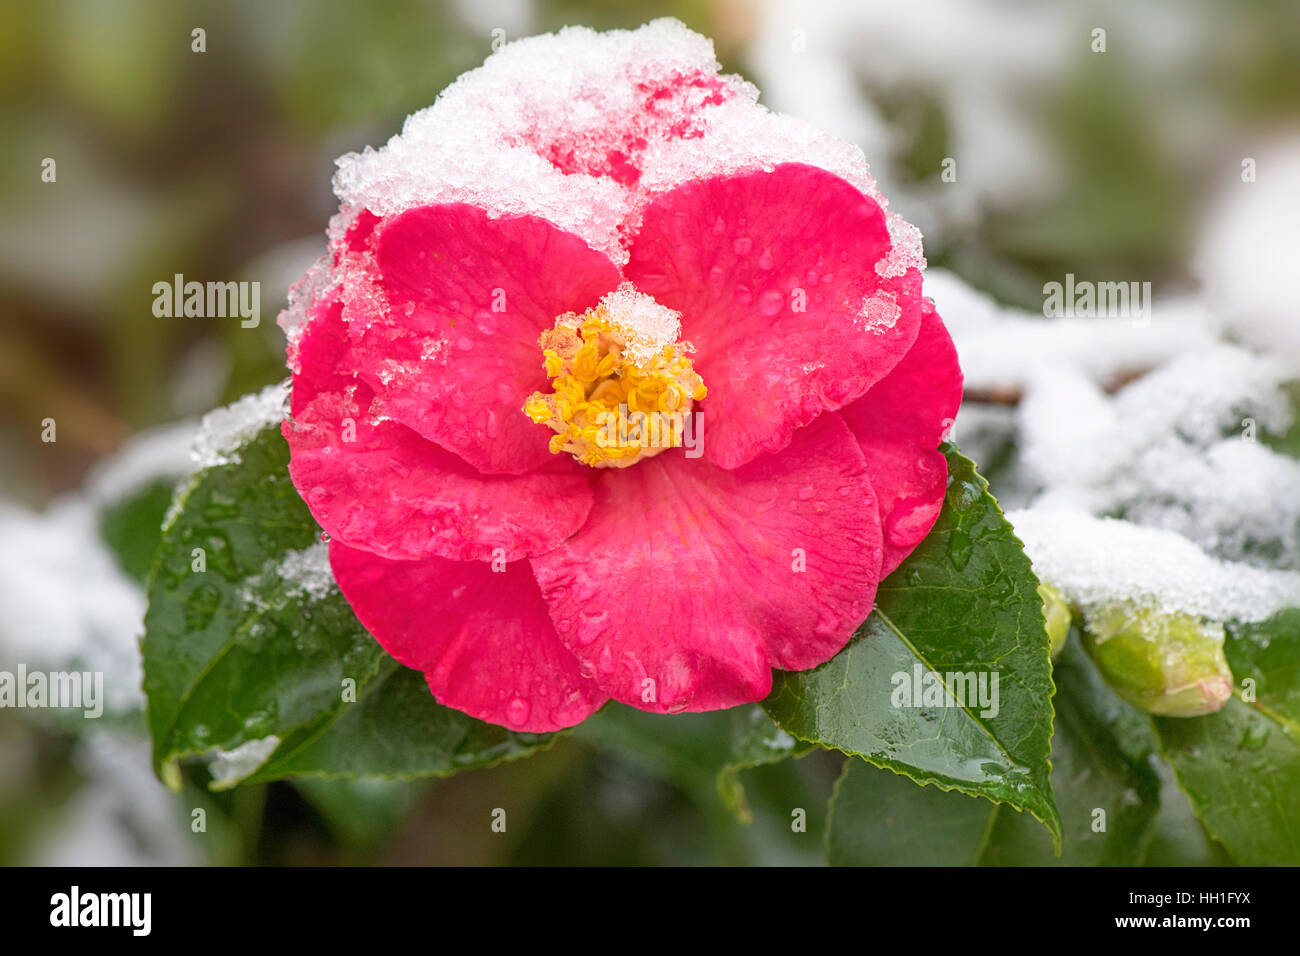 Close-up image of a red Camellia flower covered in snow. Stock Photo